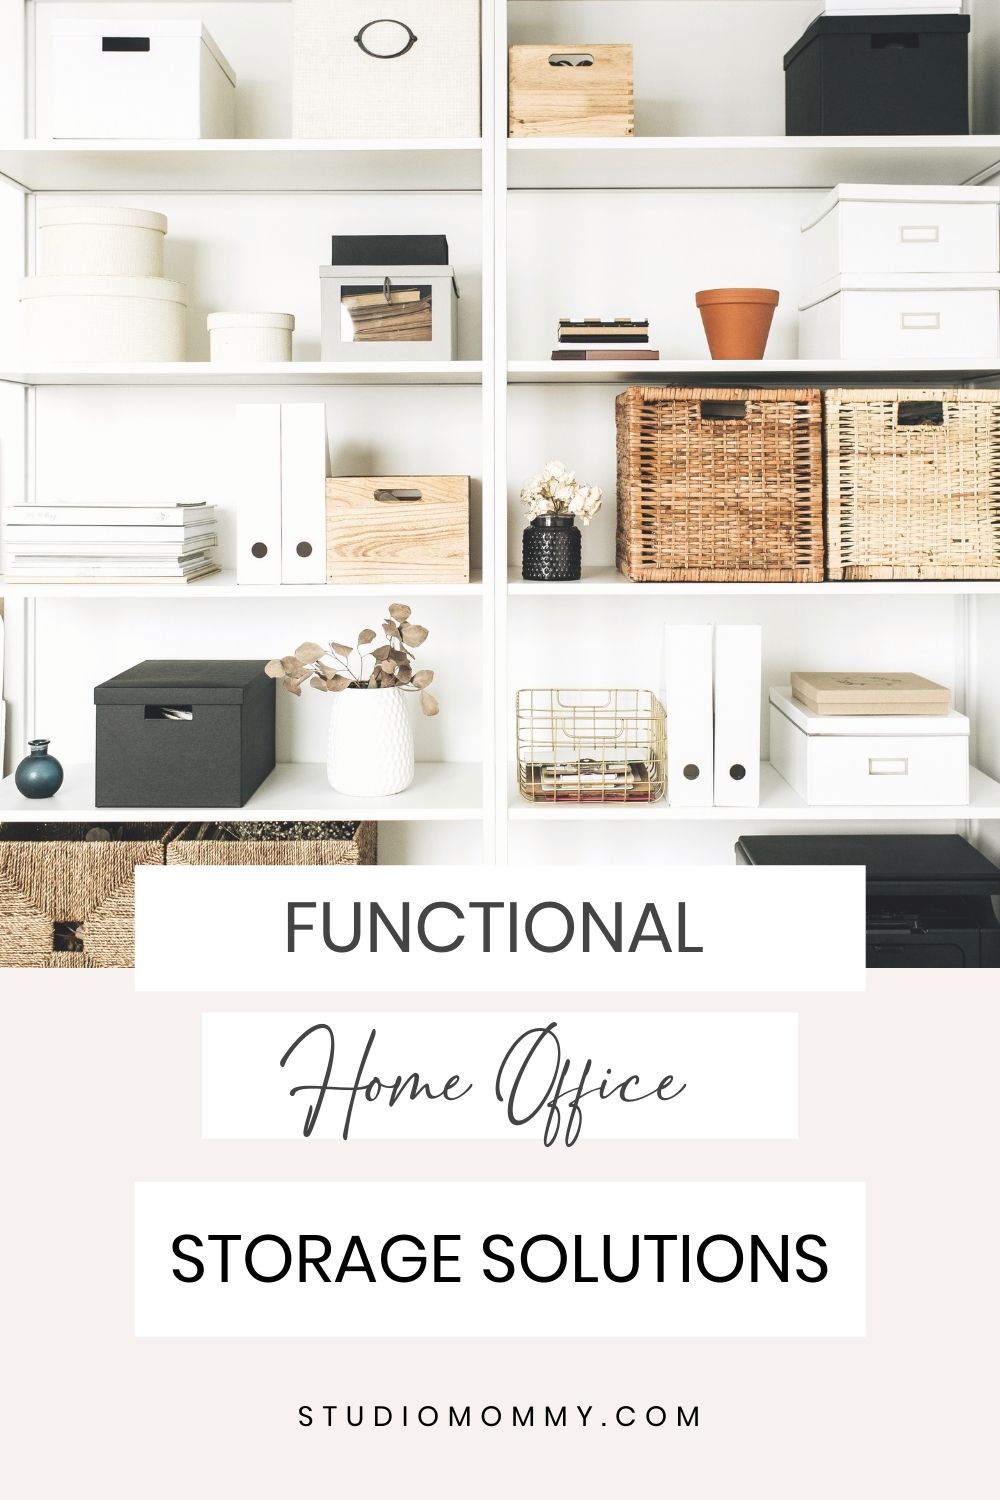 As a work-from-home female entrepreneur, I am constantly looking for creative storage solutions for my home office.  With three children, space is tight; therefore, functional storage is essential.  My three favorite places to shop for storage ideas are The Container Store, Target, and Amazon.  Here are a few of my favorite home office storage solutions. @studiomommy